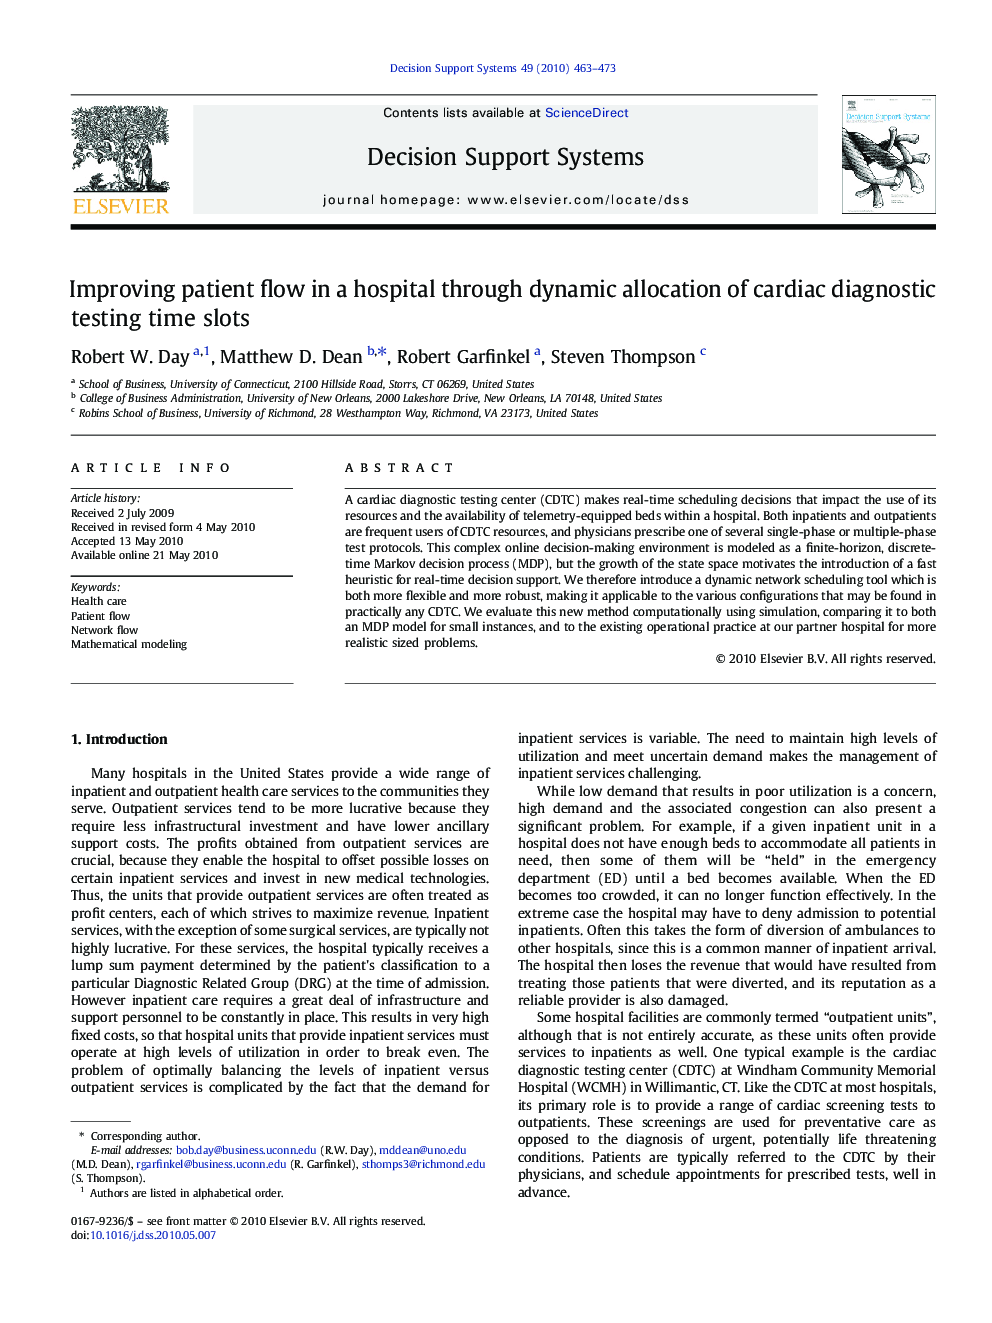 Improving patient flow in a hospital through dynamic allocation of cardiac diagnostic testing time slots